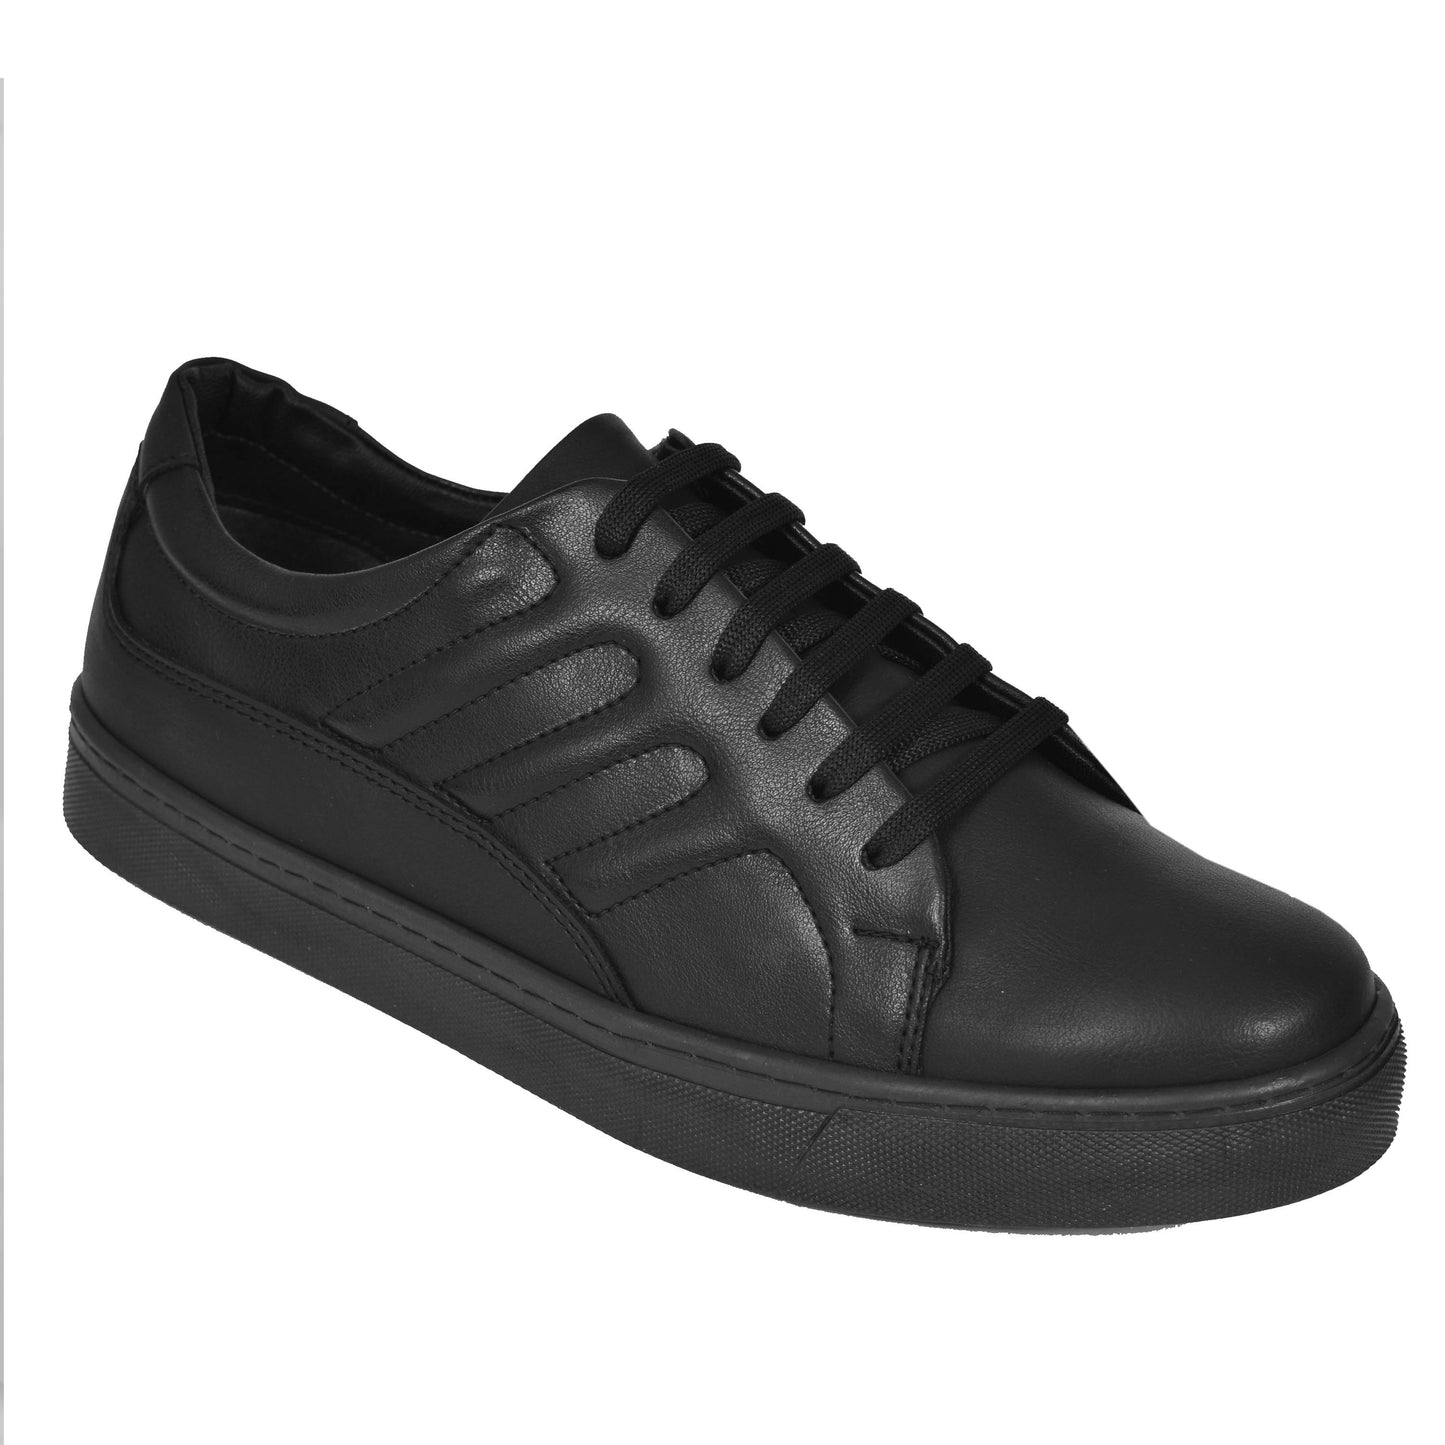 2H #9522 Black Casual Shoes